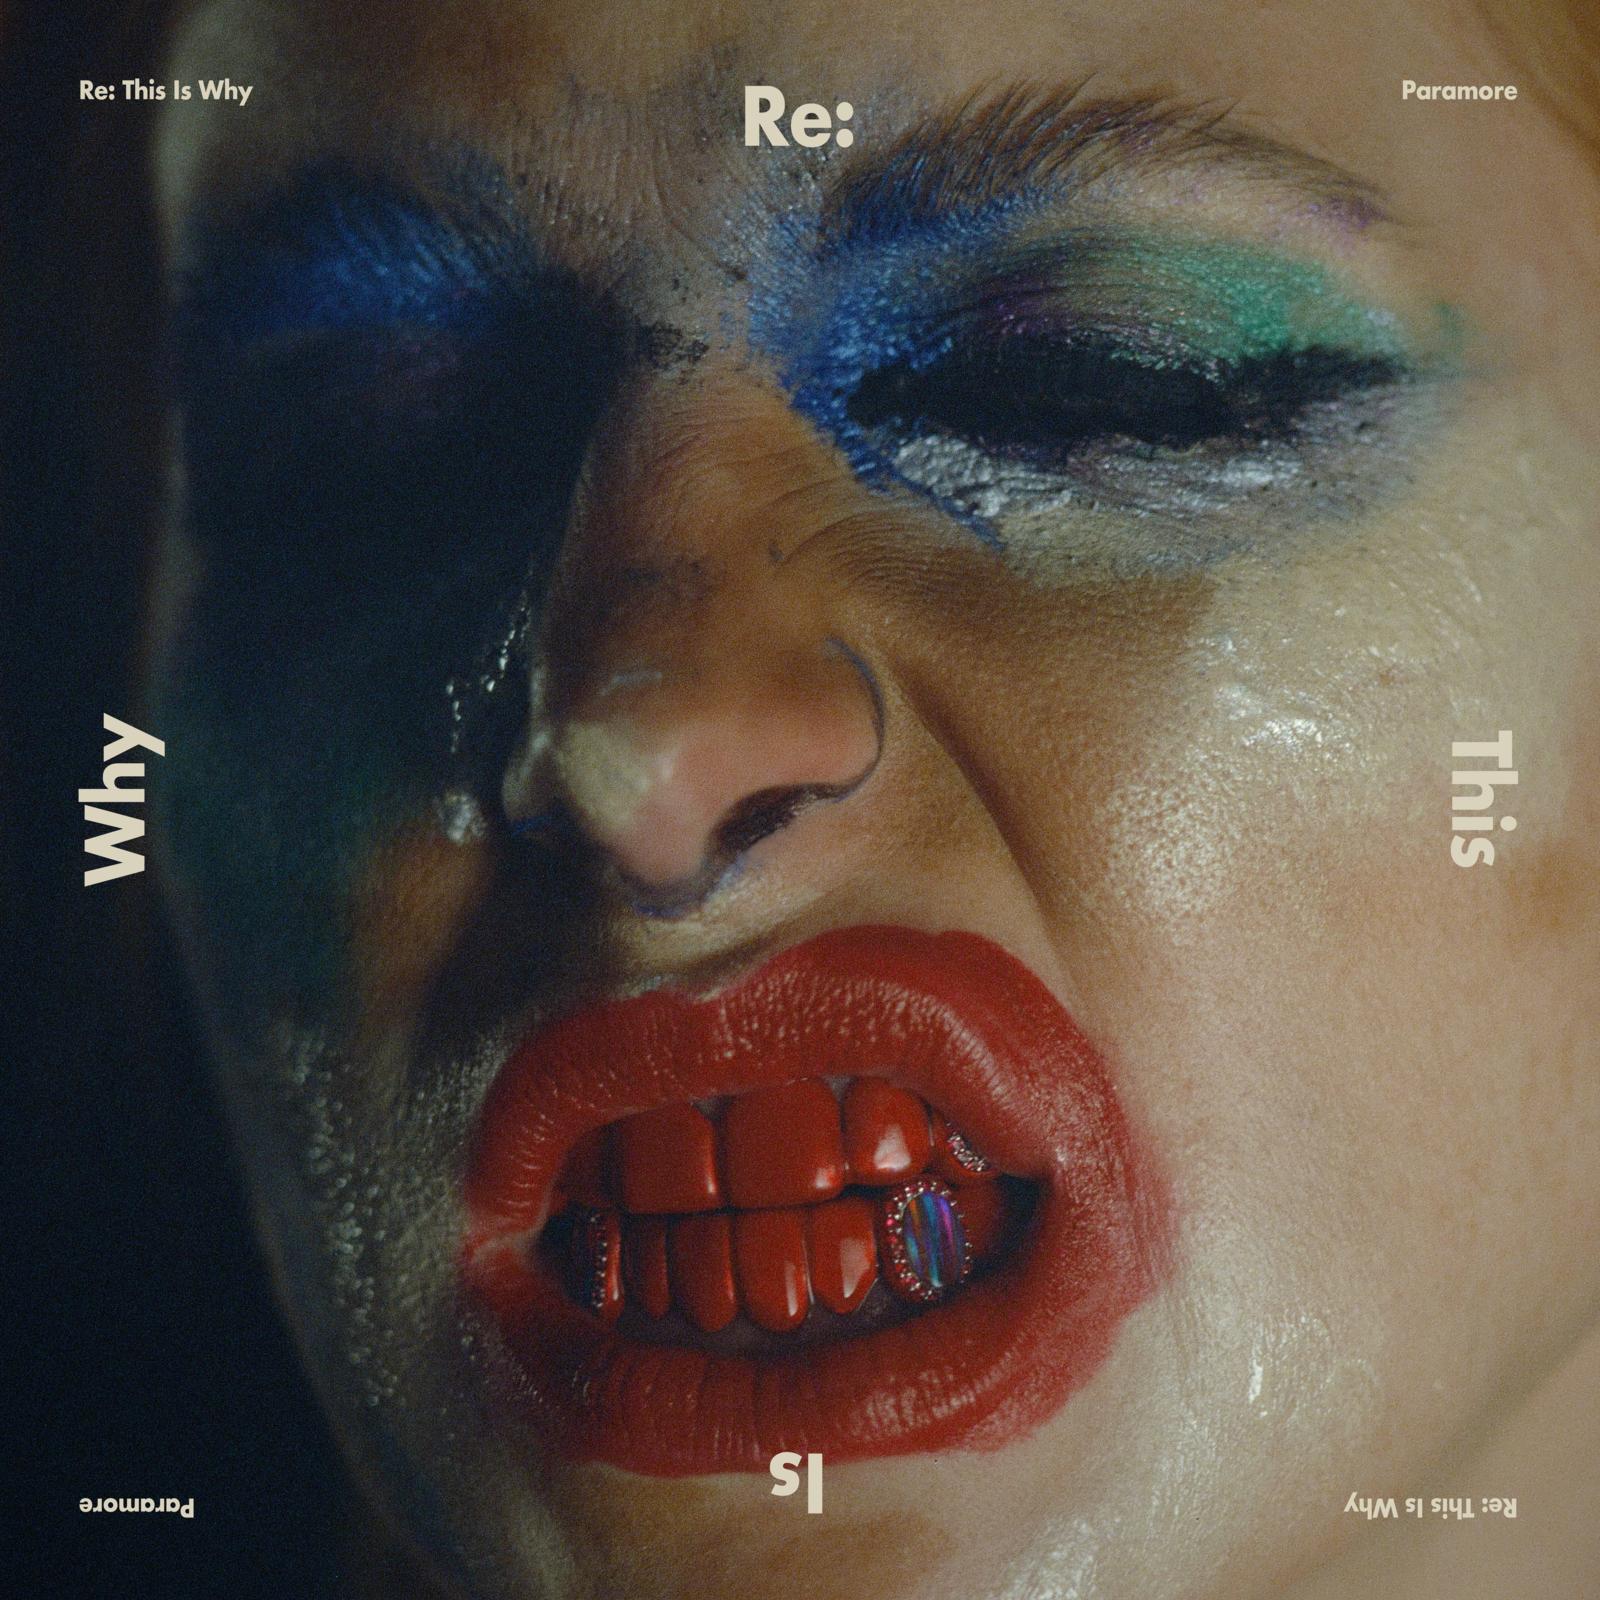 Paramore - RE: This Is Why - Album Art